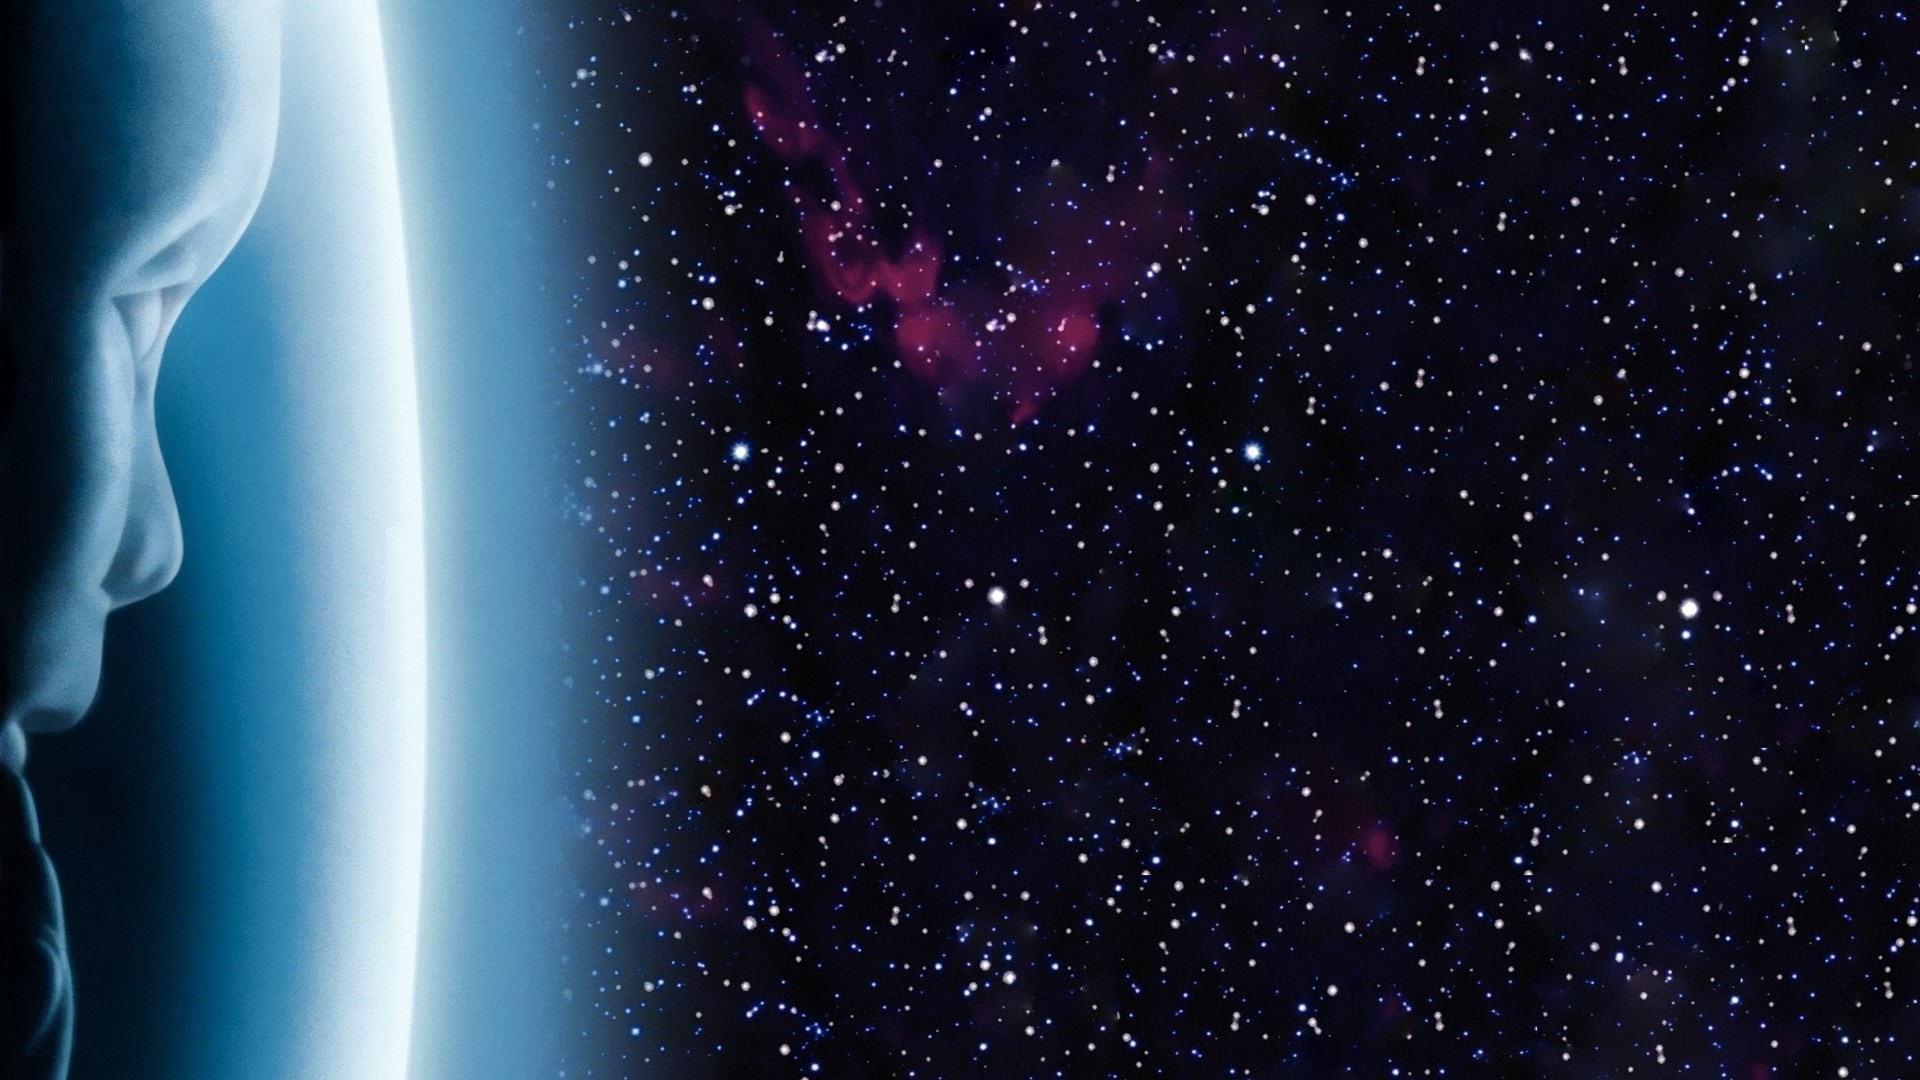 1920x1080 2001 a space odyssey : Wallpaper Collection